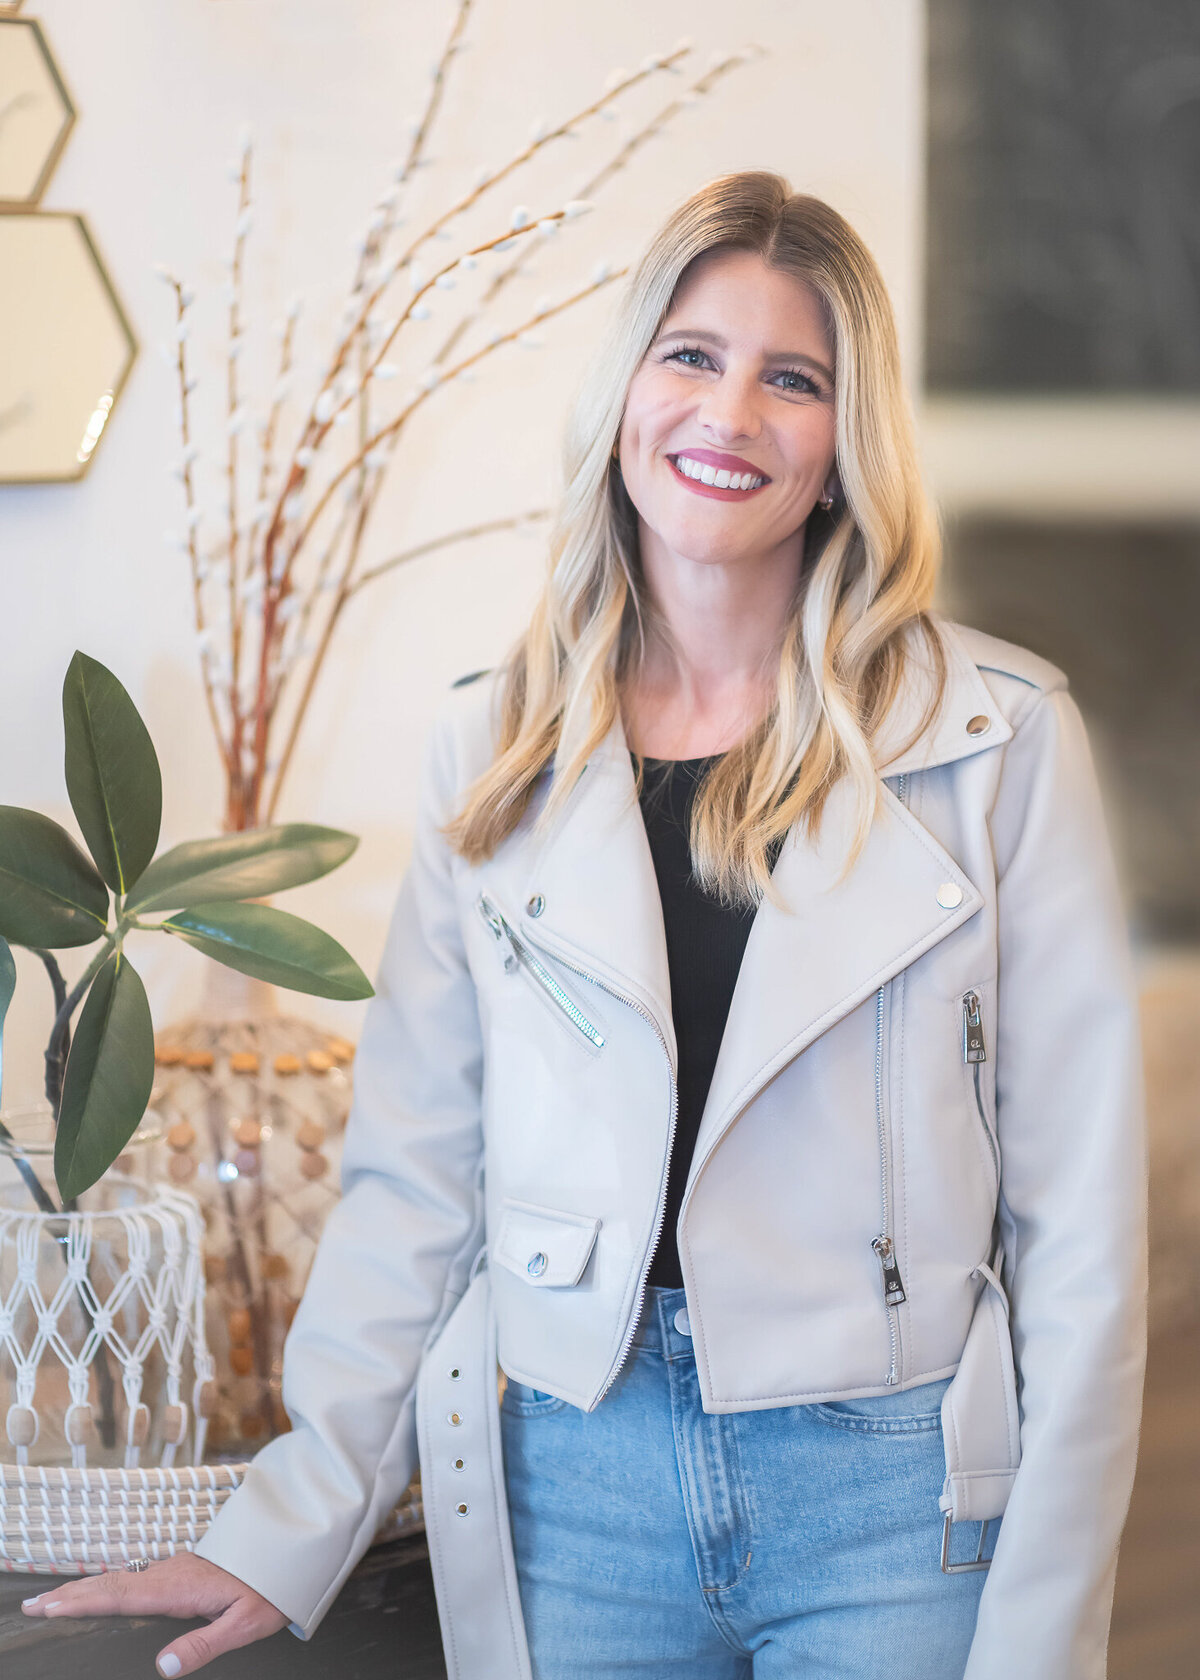 Lovely blonde woman wearing a light grey leathers jacket standing next to plants in vases on a table